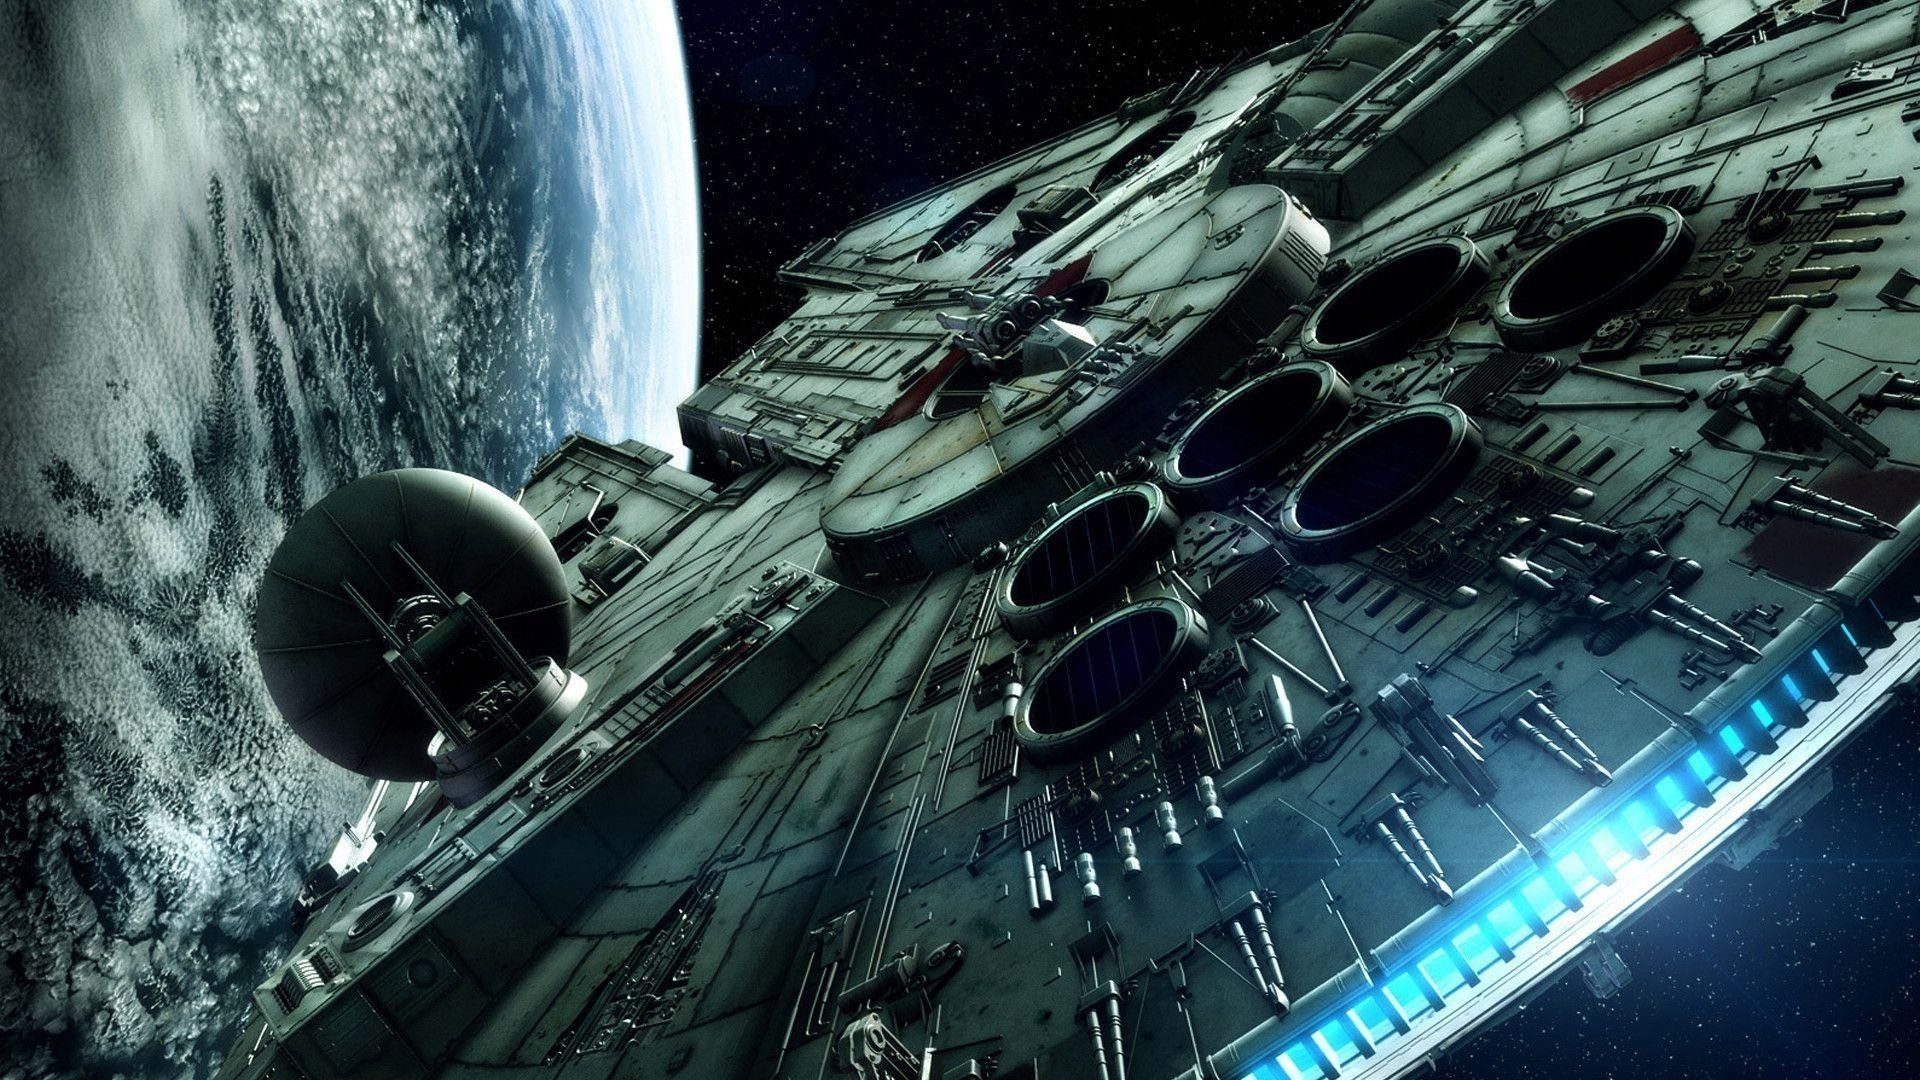 star wars hd wallpapers 1920x1080 (62+ images)